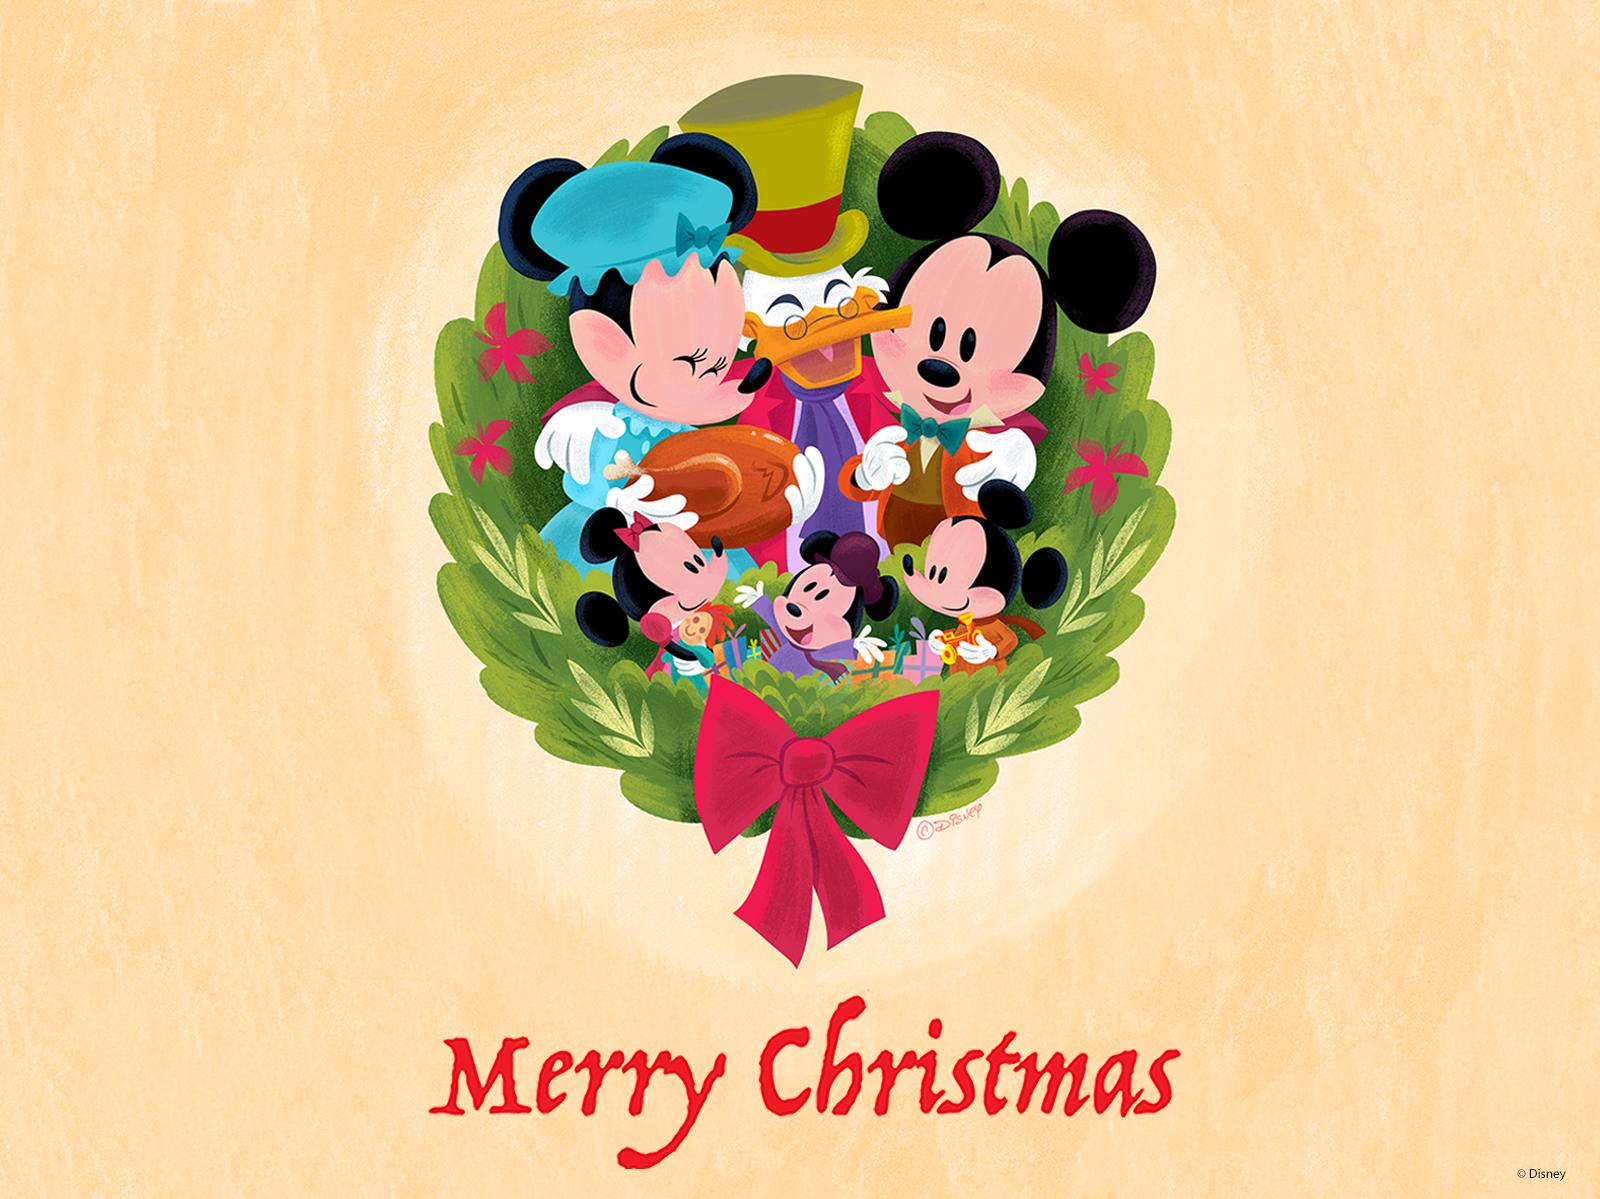 These Special Holiday Wallpaper Designed By Disney